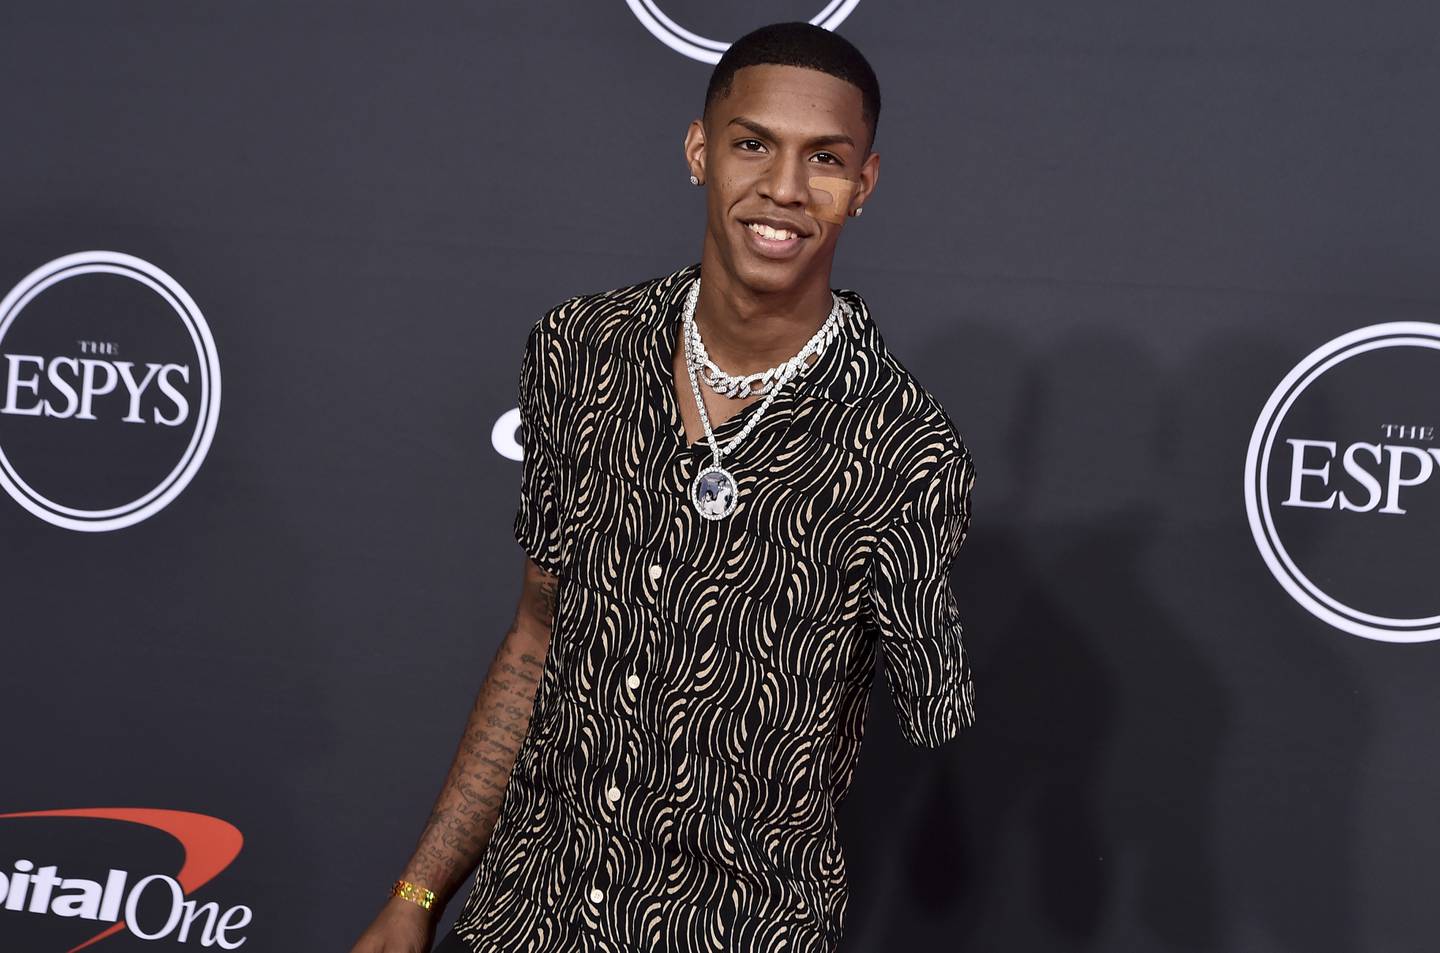 High school basketball player Hansel Enmanuel of Life Christian Academy arrives at the ESPY Awards on Wednesday, July 20, 2022, at the Dolby Theatre in Los Angeles. (Photo by Jordan Strauss/Invision/AP)